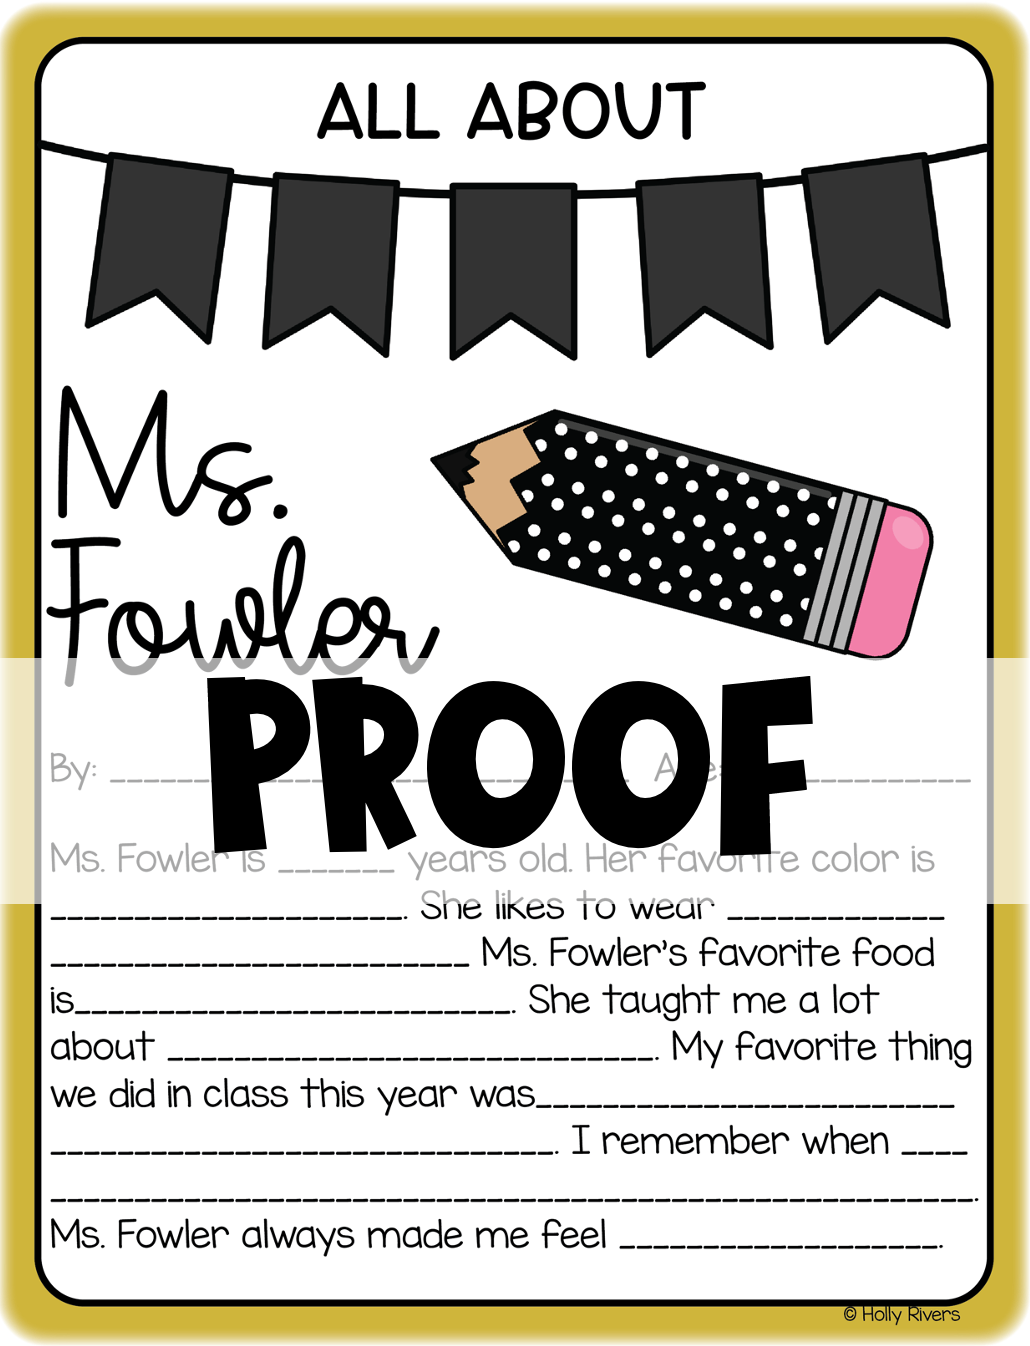 All About Ms. Fowler (Black and Gold)